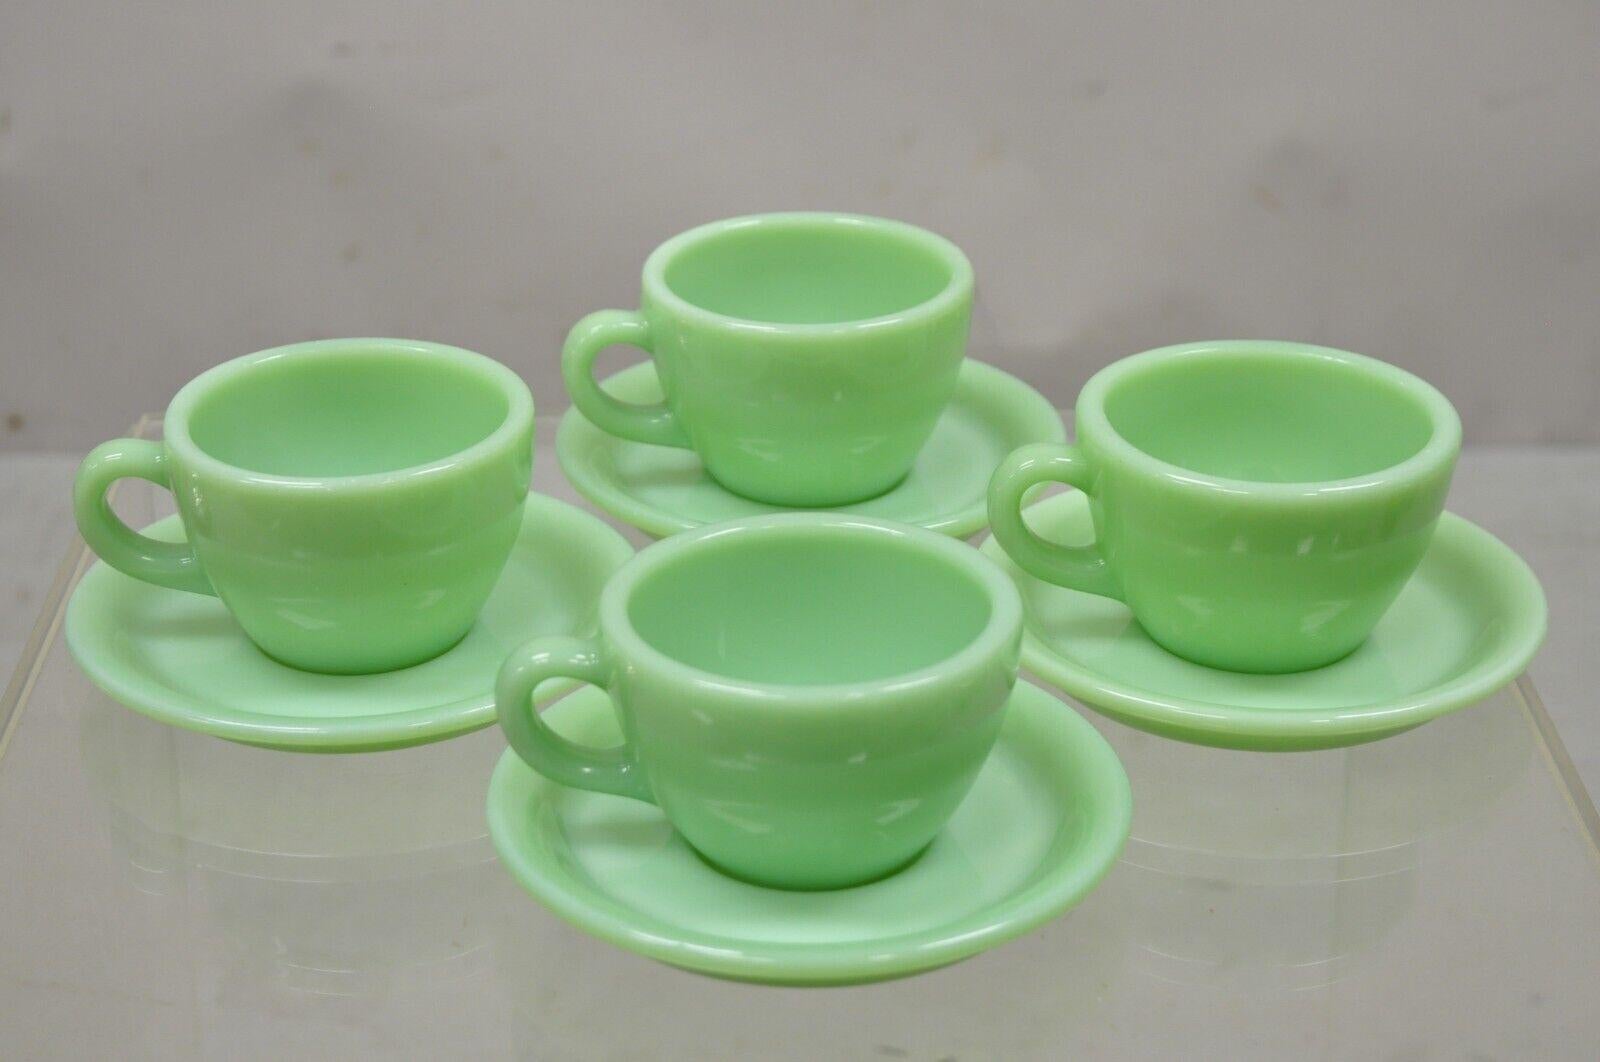 Vintage Fire King Jadeite Green Oven Ware Coffee Cup and Saucer - Set of 4 4